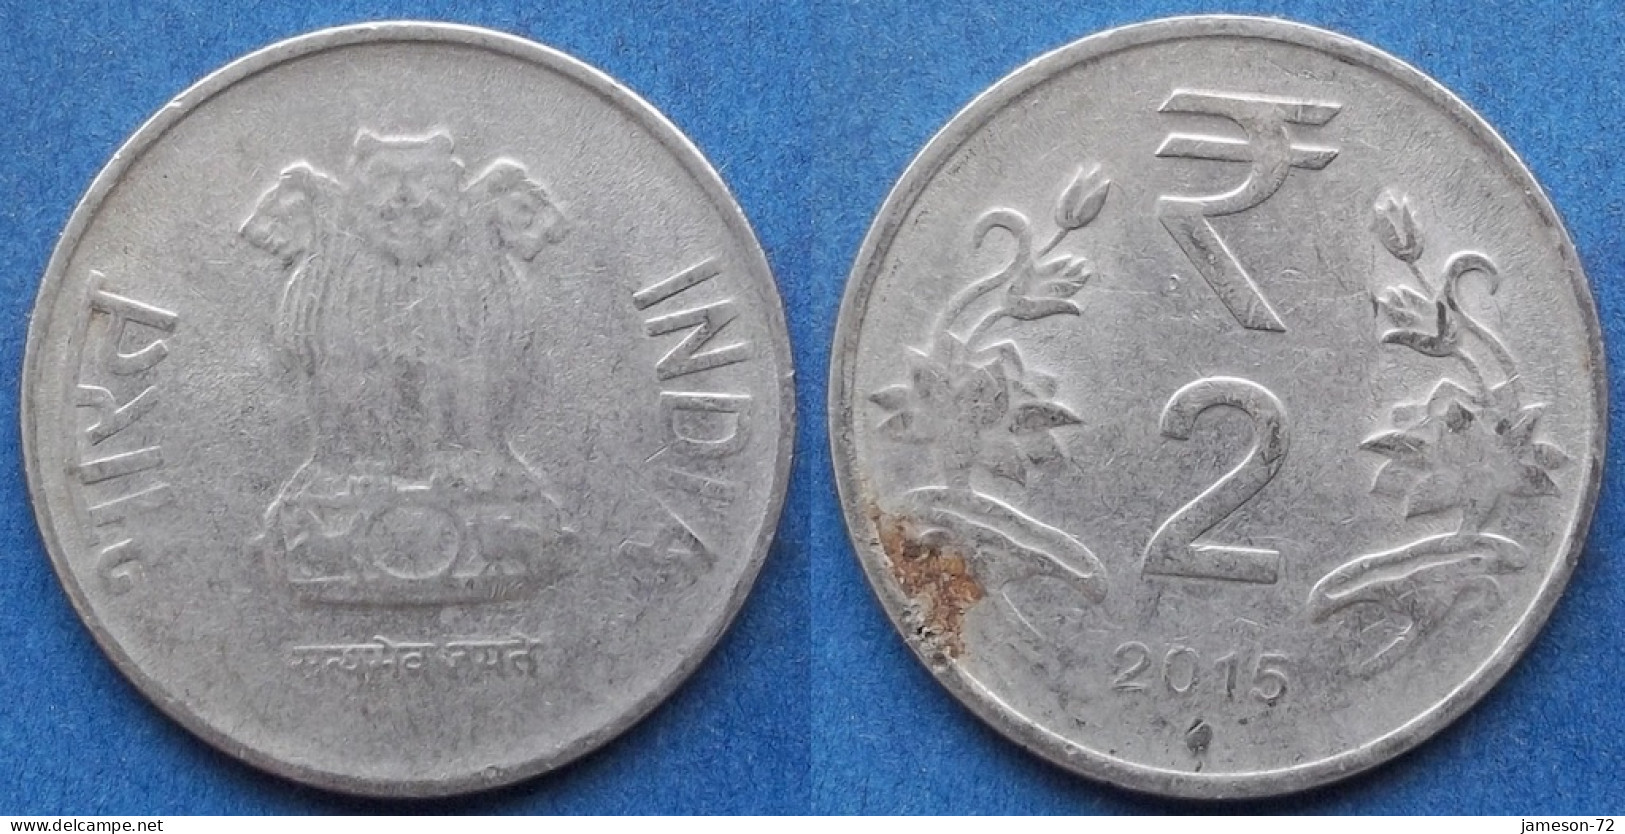 INDIA - 2 Rupees 2015 "Lotus Flowers" KM# 395 Republic Decimal Coinage (1957) - Edelweiss Coins - Georgië